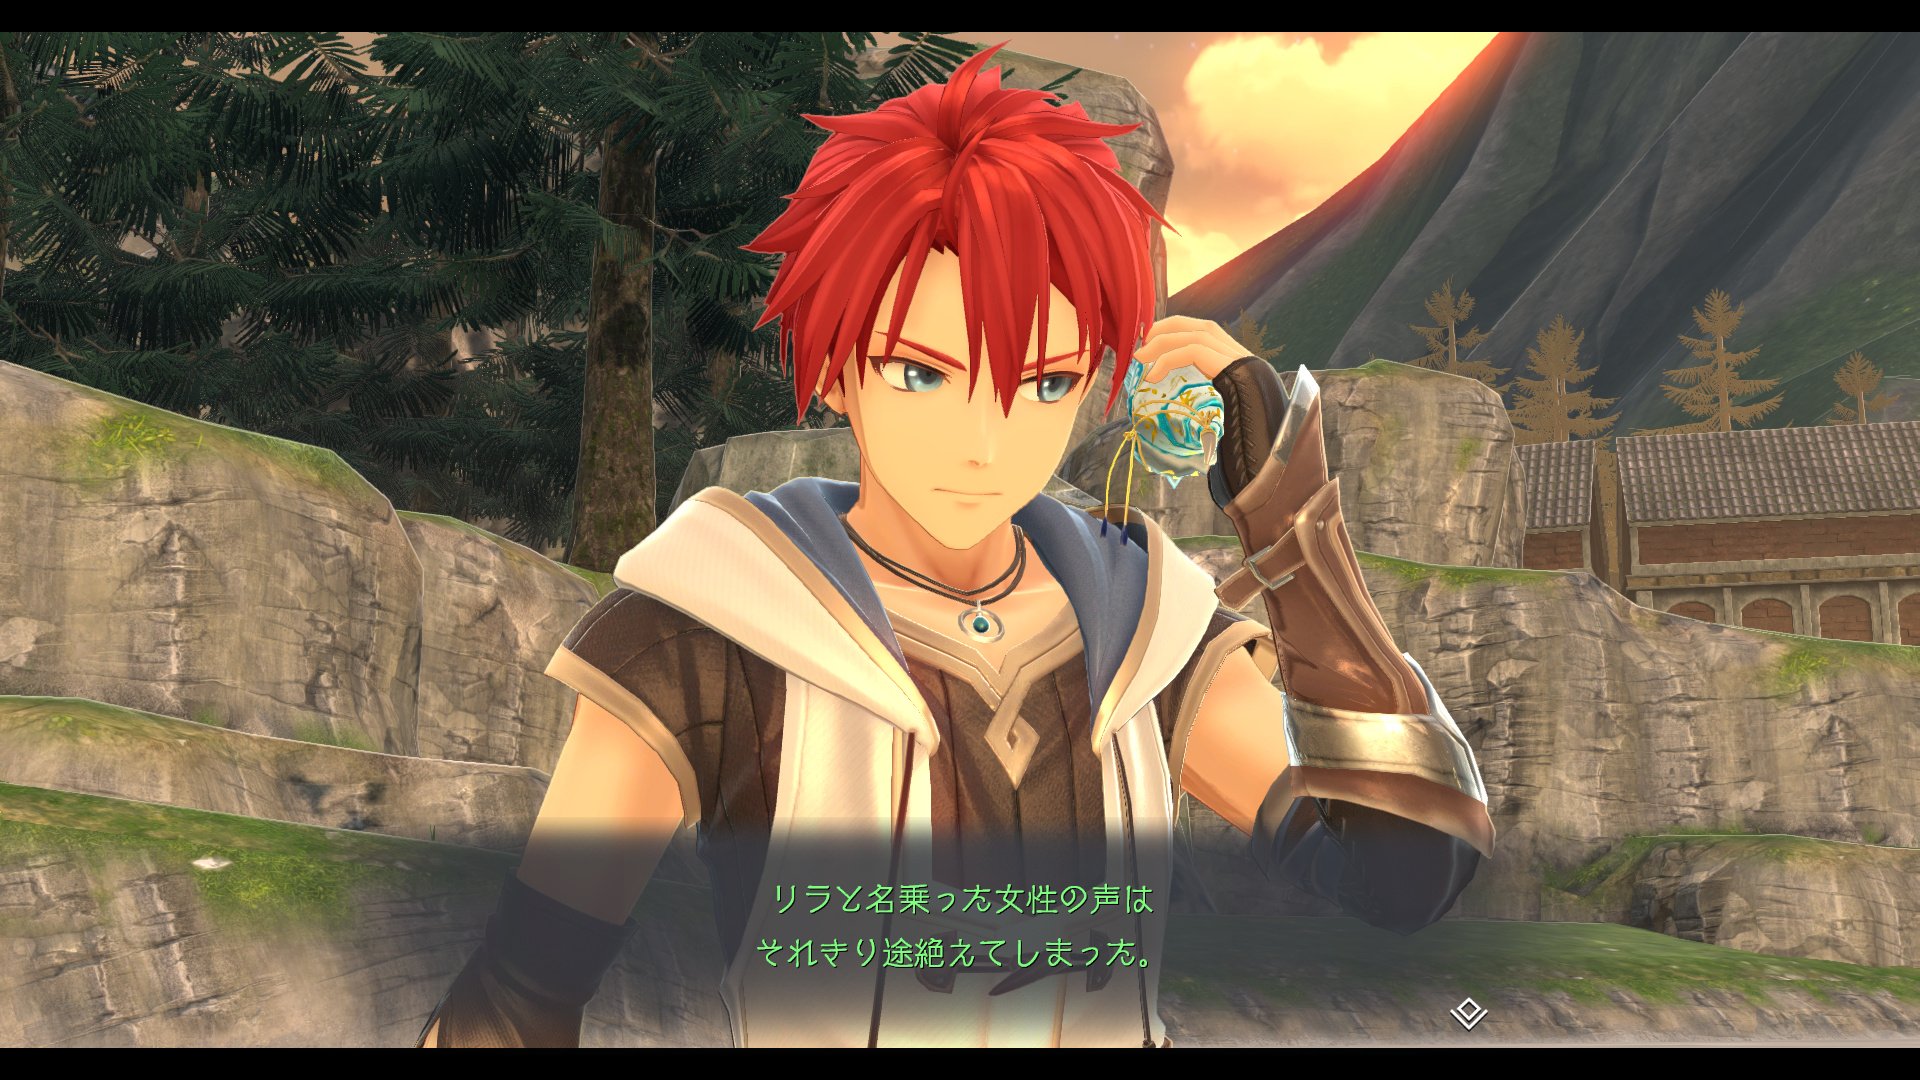 Ys X: Nordics Character Introduction Trailer Lets You Meet The